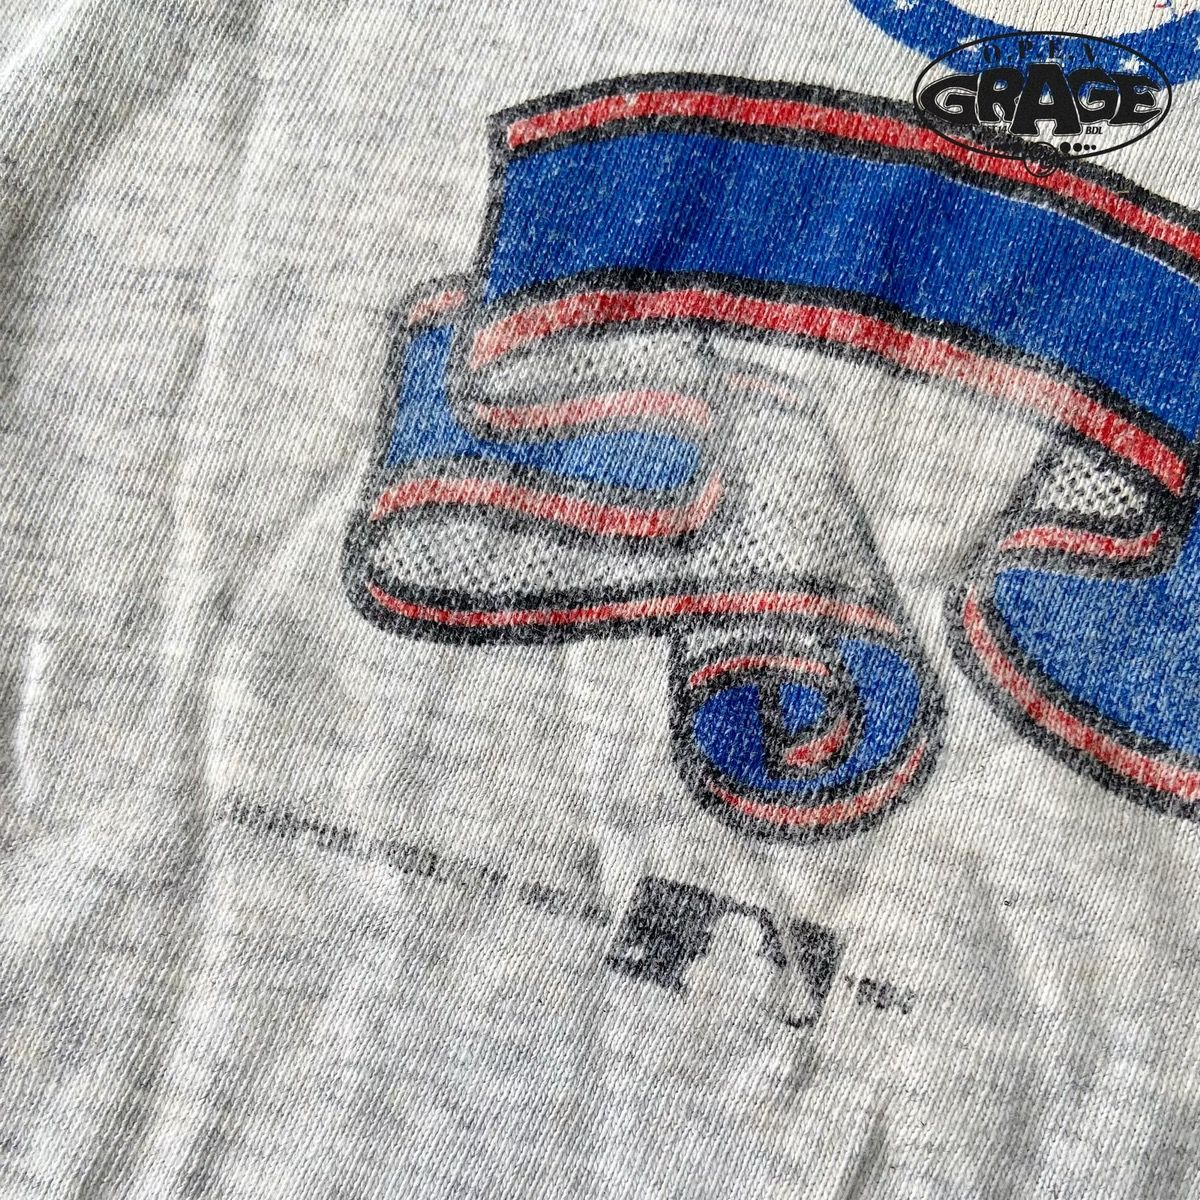 Vintage ©1994 TEXAS RANGERS by CHAMPION - 3